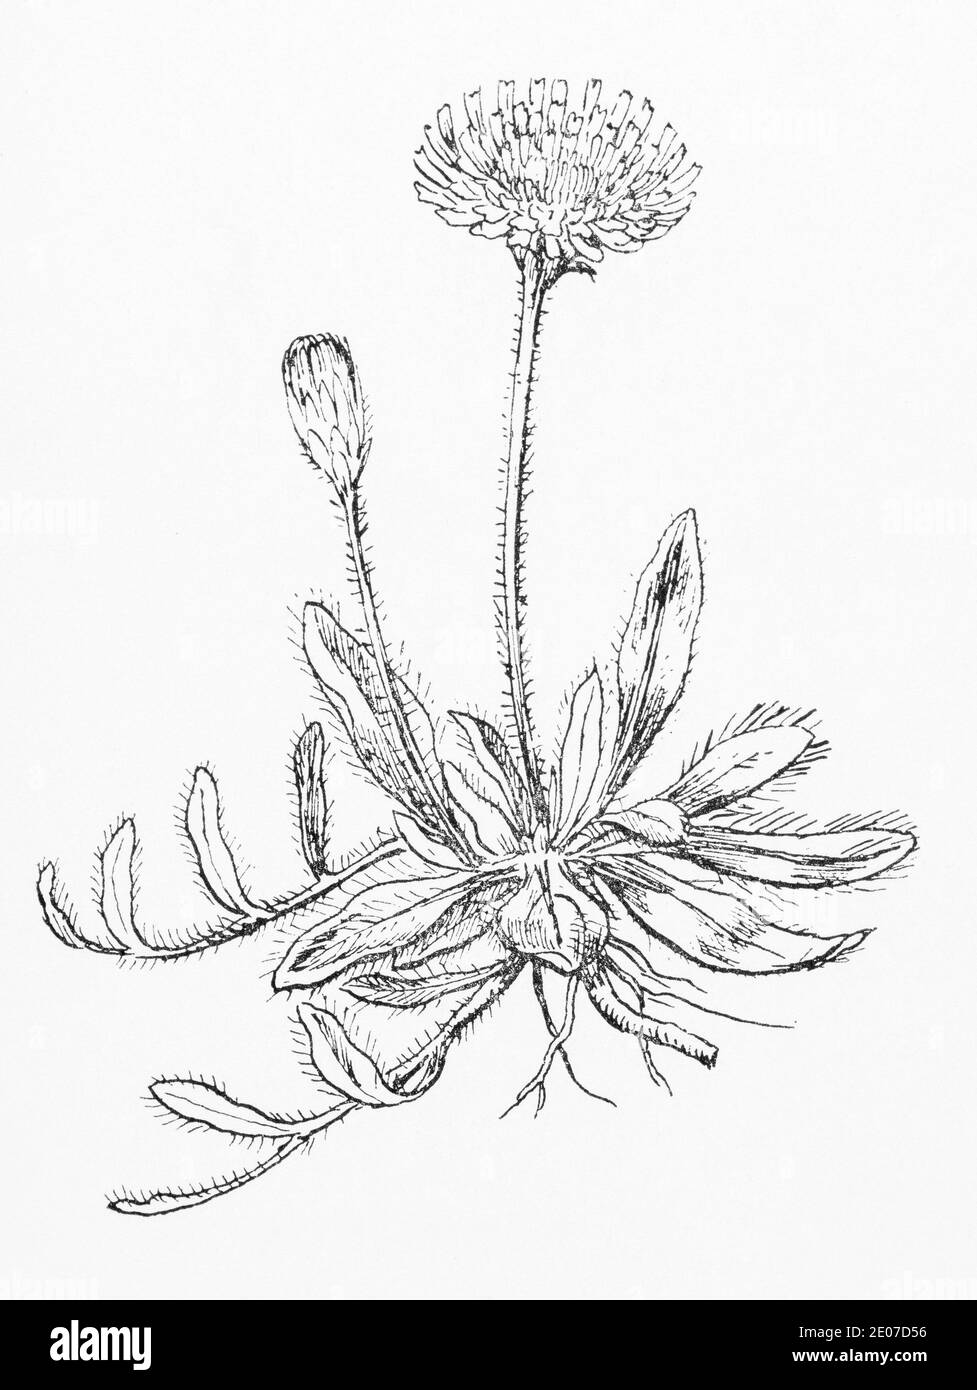 Old botanical illustration engraving of Mouse-Ear Hawkweed / Pilosella officinarum, Hieracium pilosella. Traditional medicinal herbal plant. See Notes Stock Photo